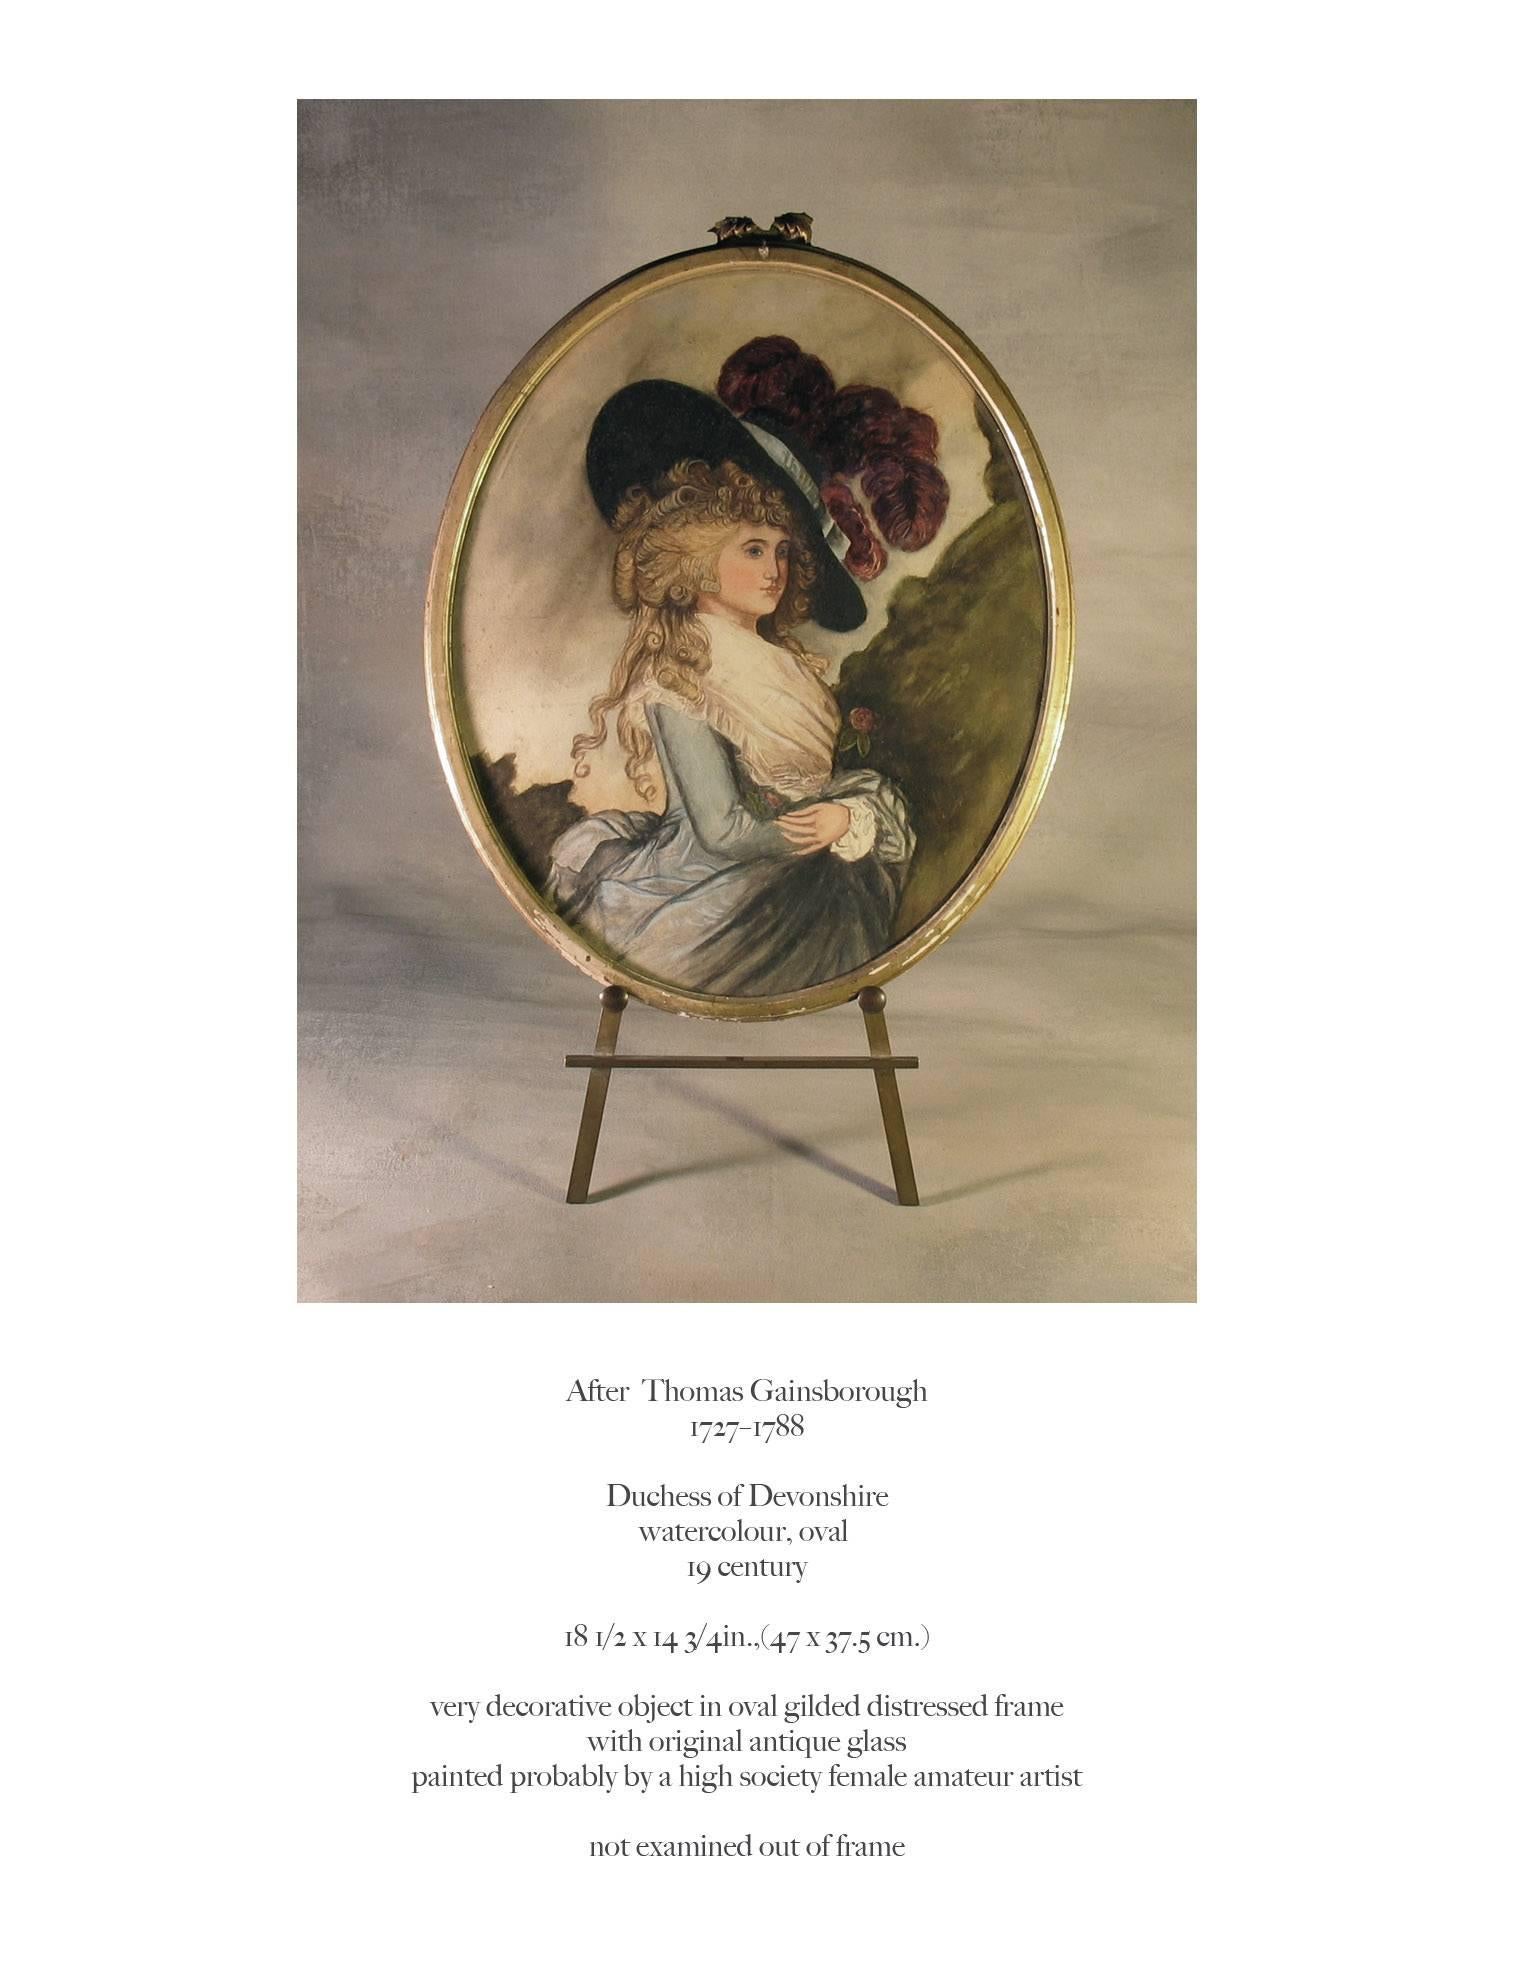 After Thomas Gainsborough 1727-1788, The Duchess of Devonshire watercolor, oval 19th century. A very decorative object in oval gilded distressed frame with original antique glass, painted probably by a High Society female amateur artist. The